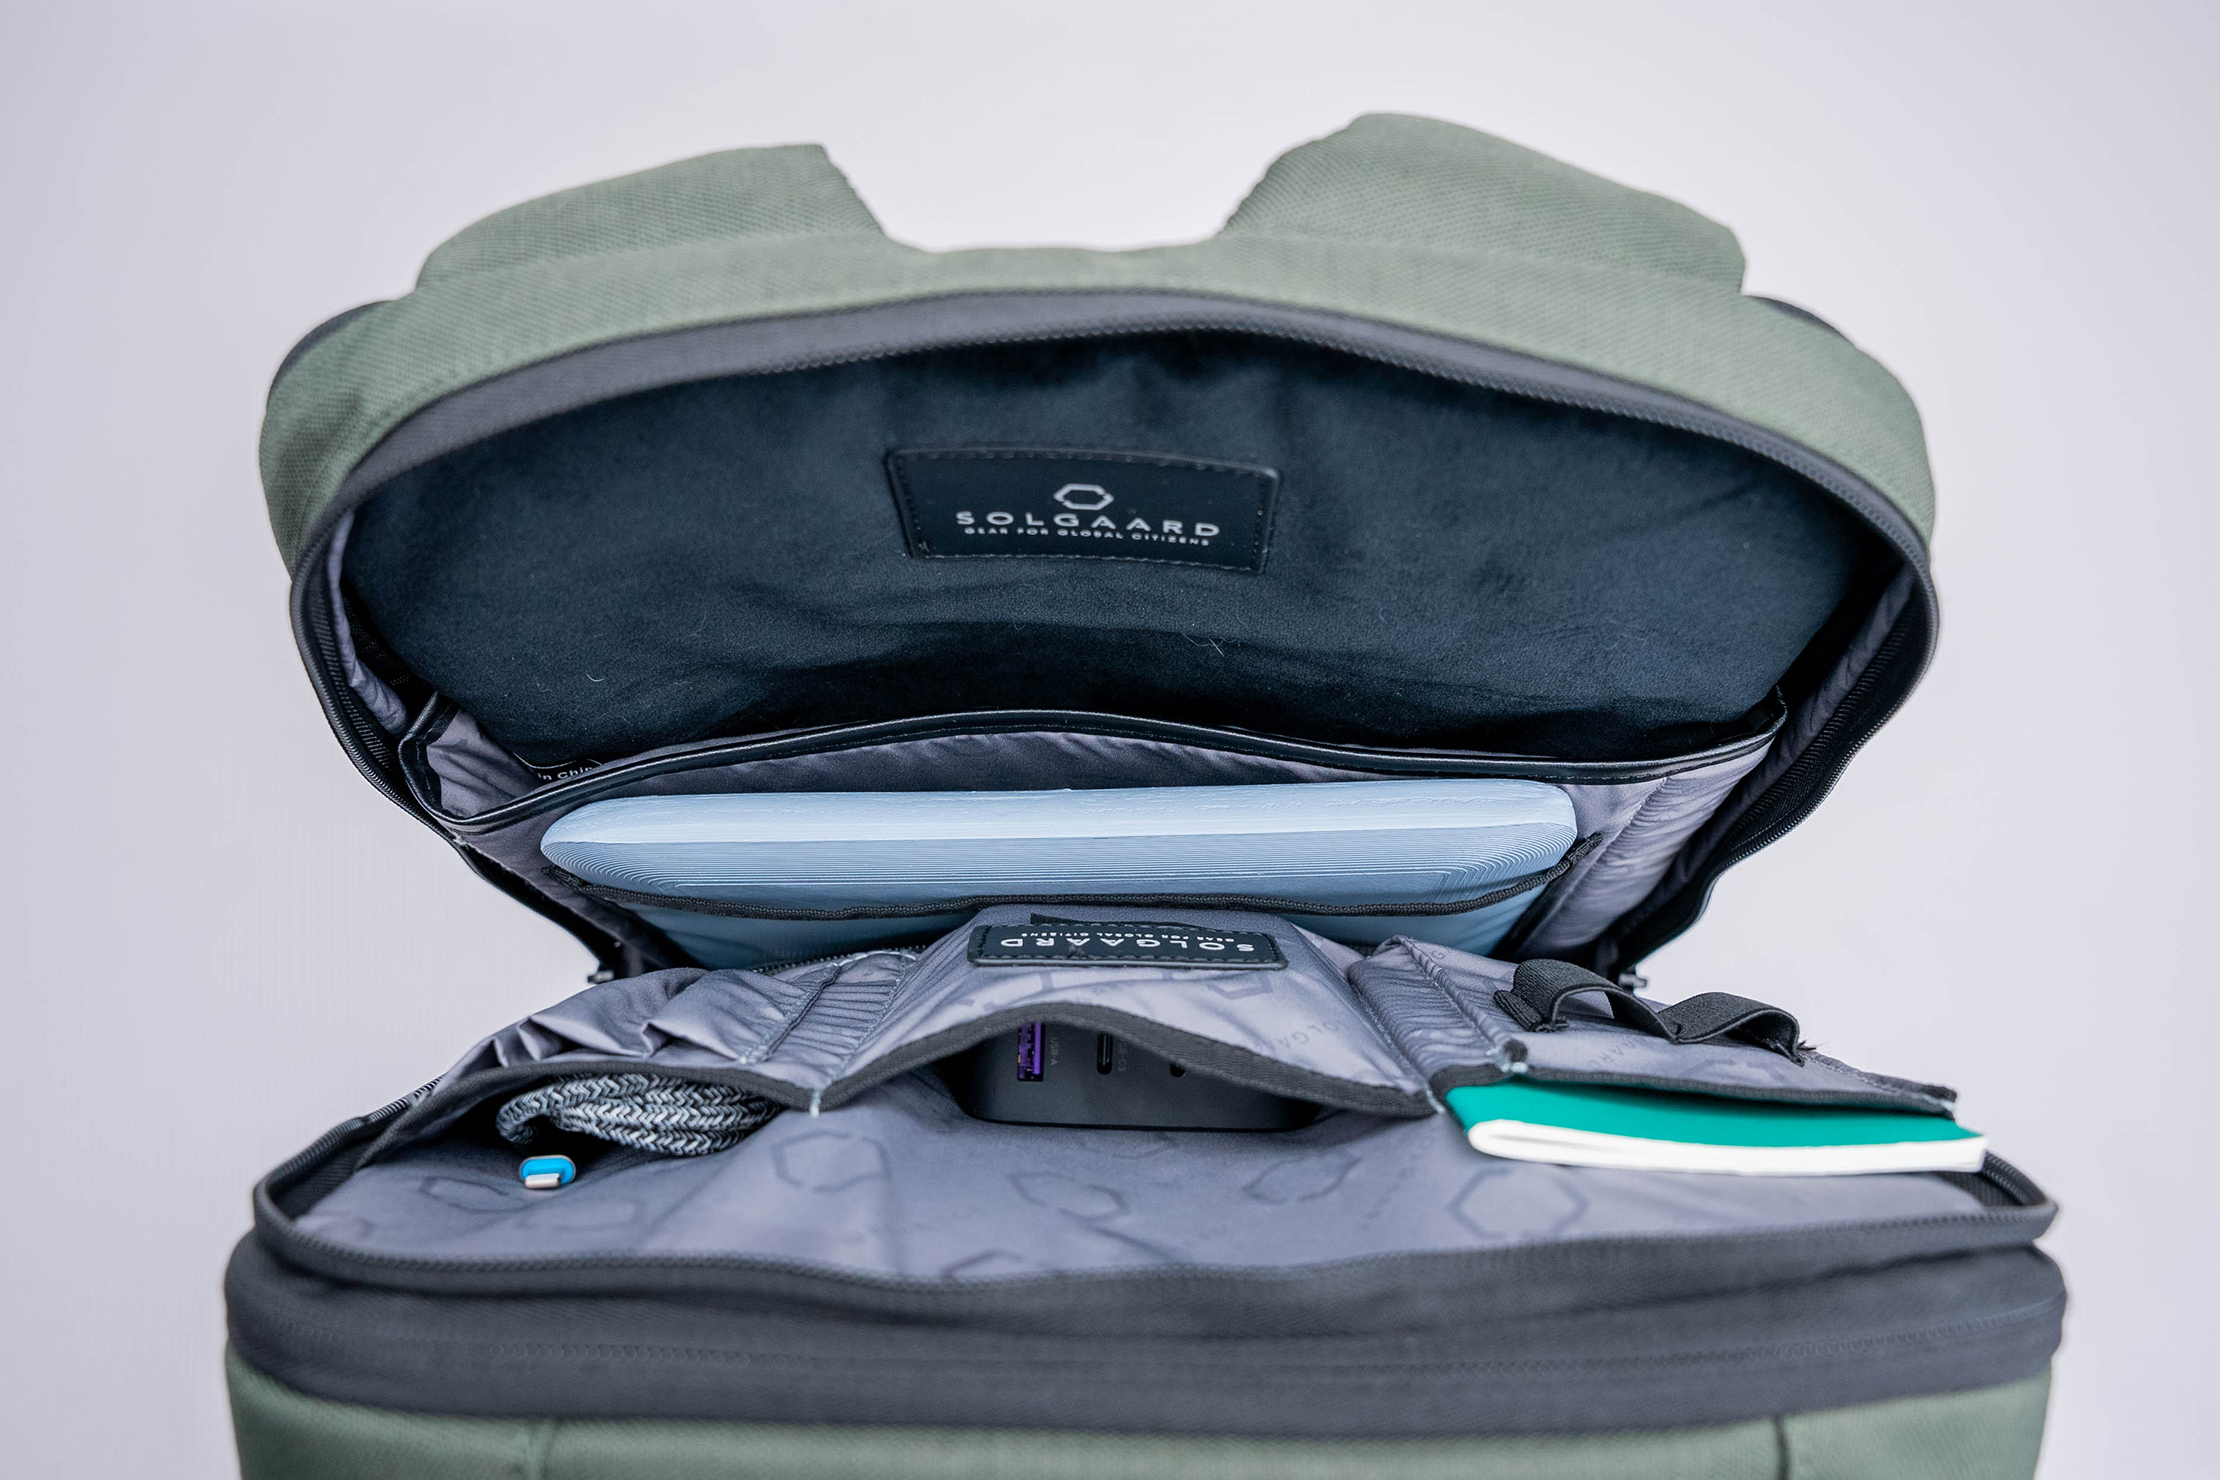 Solgaard Lifepack Endeavor (with closet) Laptop Compartment